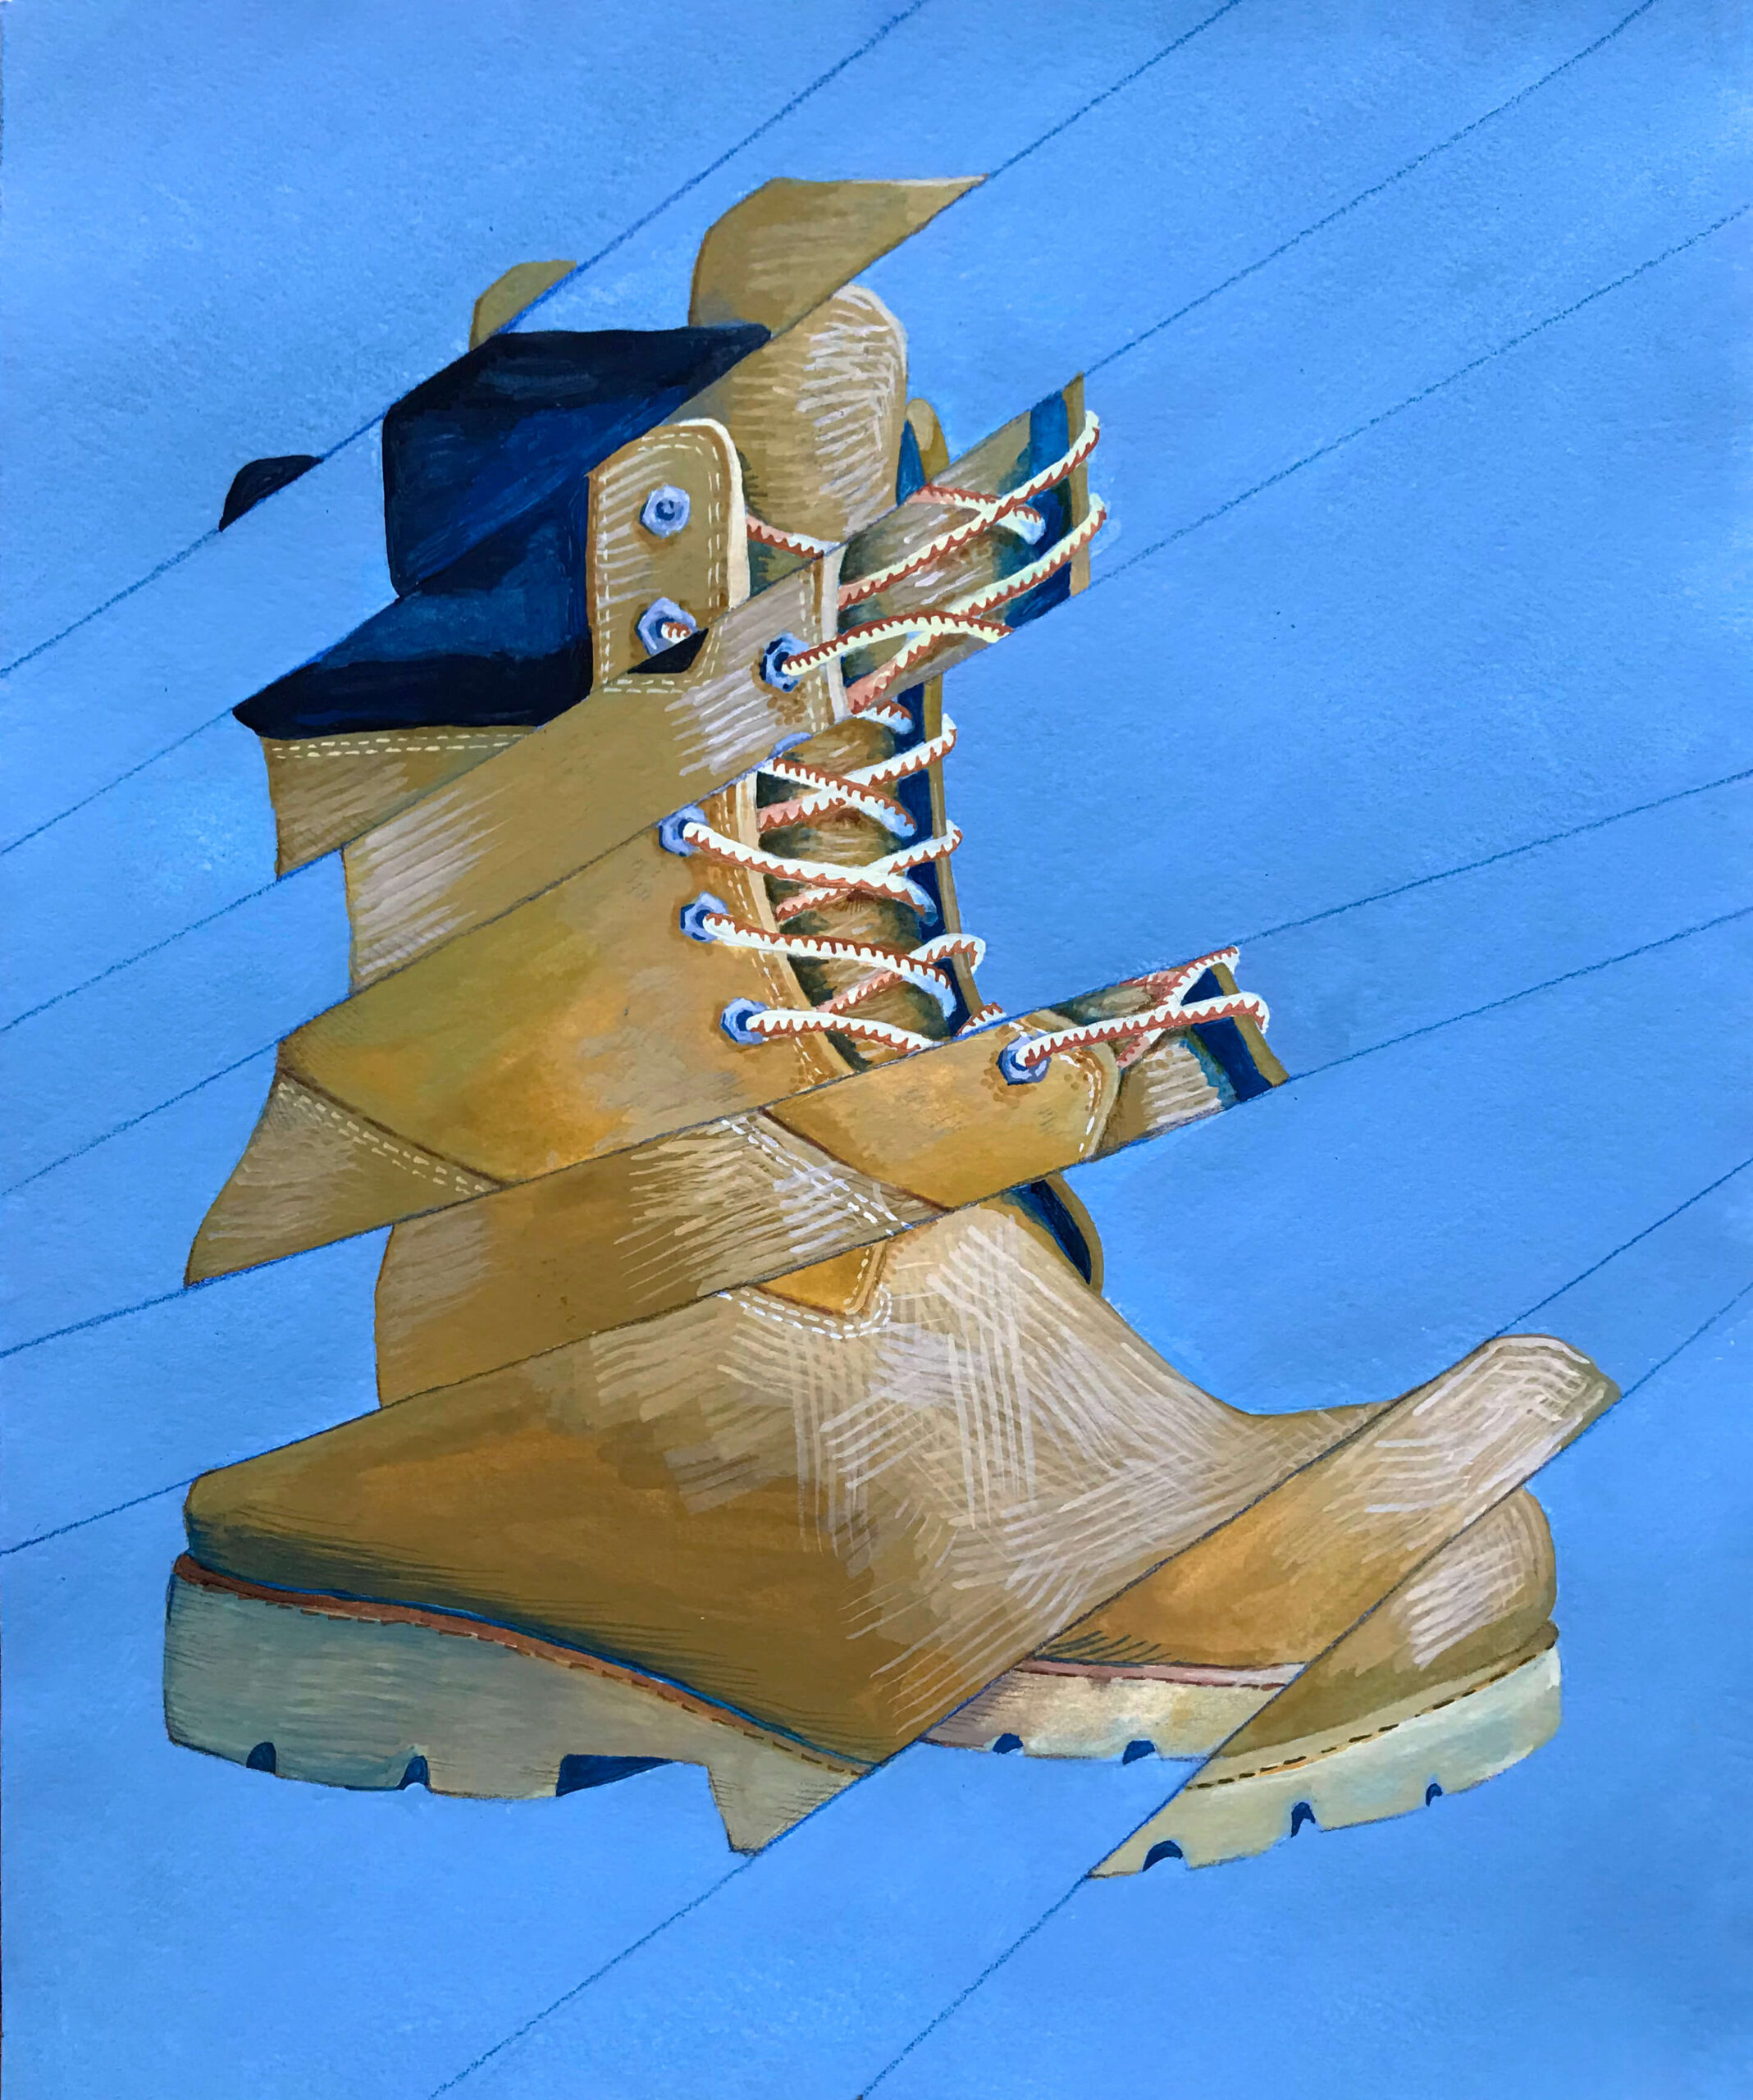 A distorted drawing of a Timberland boot with a white